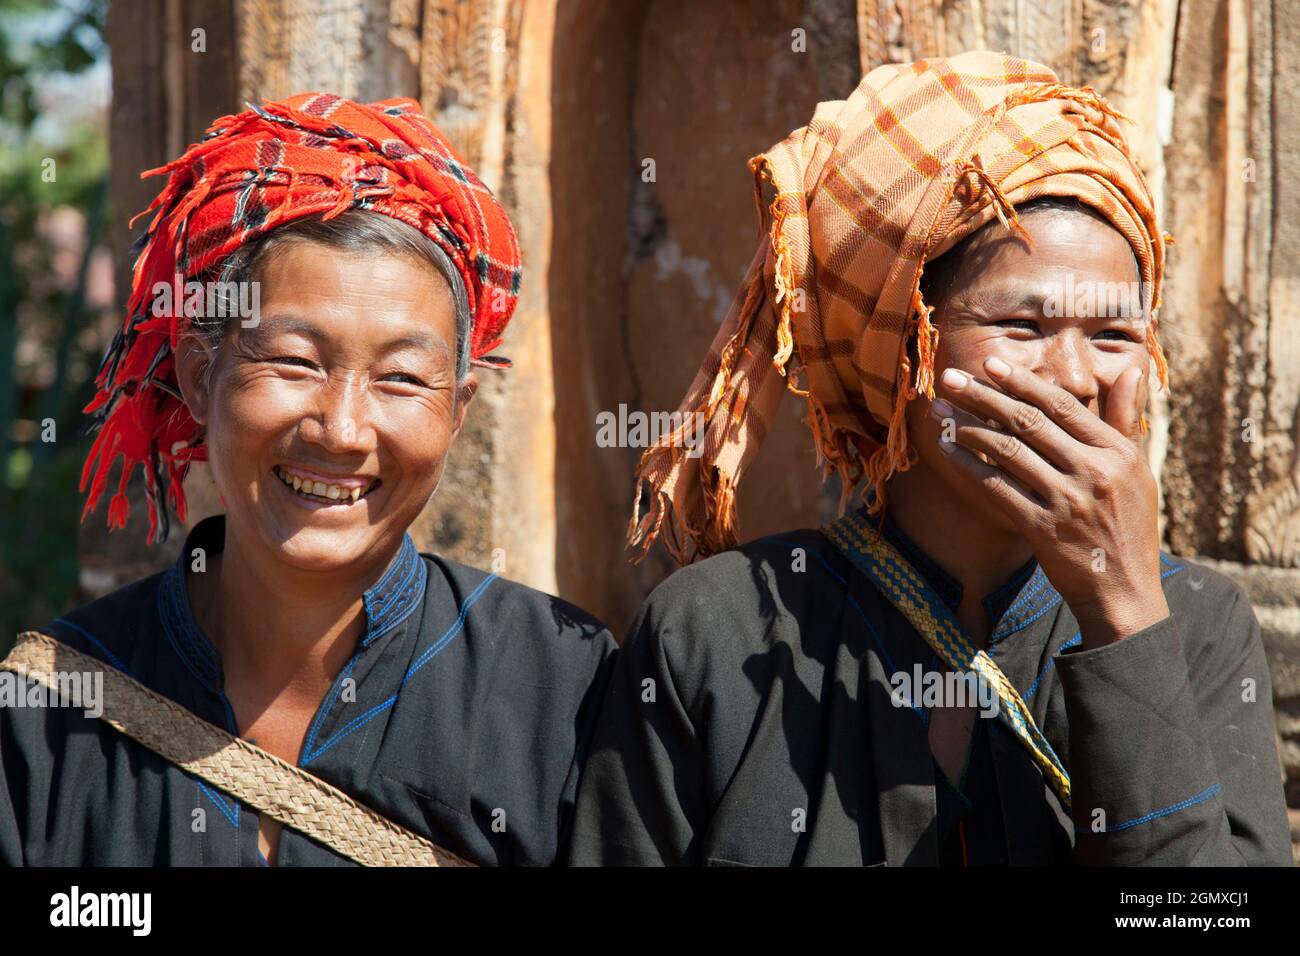 Inn Thein, Myanmar - 2 February 2013 Two tribal women having a jolly good laugh by the abandoned stupas in Inn Thein village by scenic Lake Inle. I wi Stock Photo